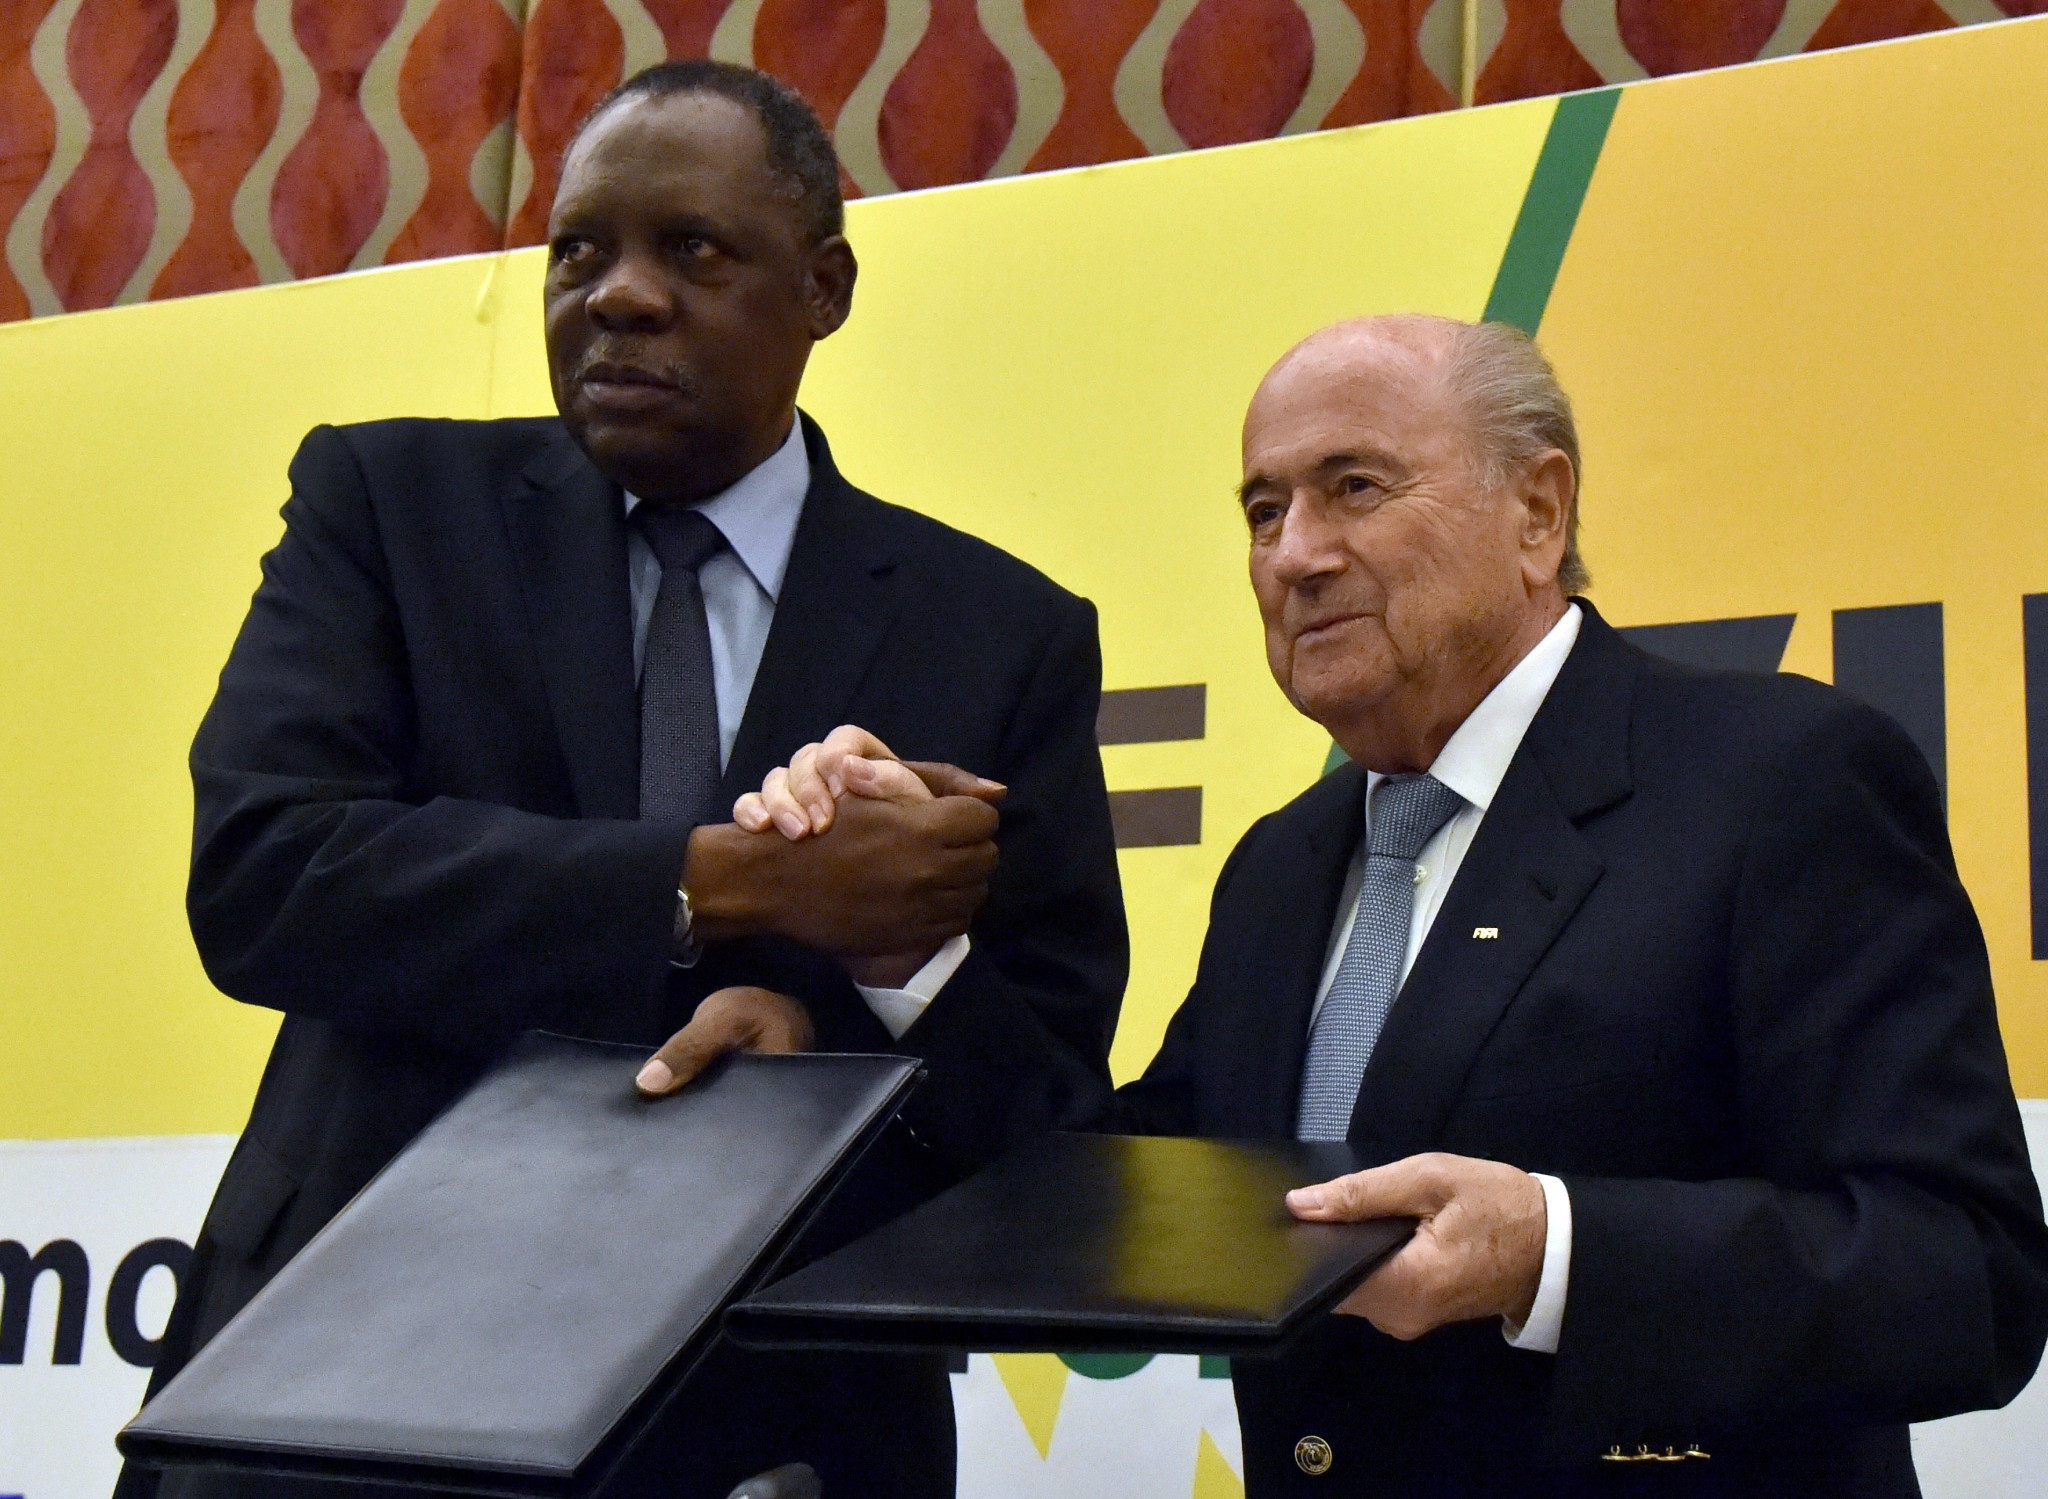 Issa Hayatou (left) has been confirmed as the interim FIFA President ©Getty Images